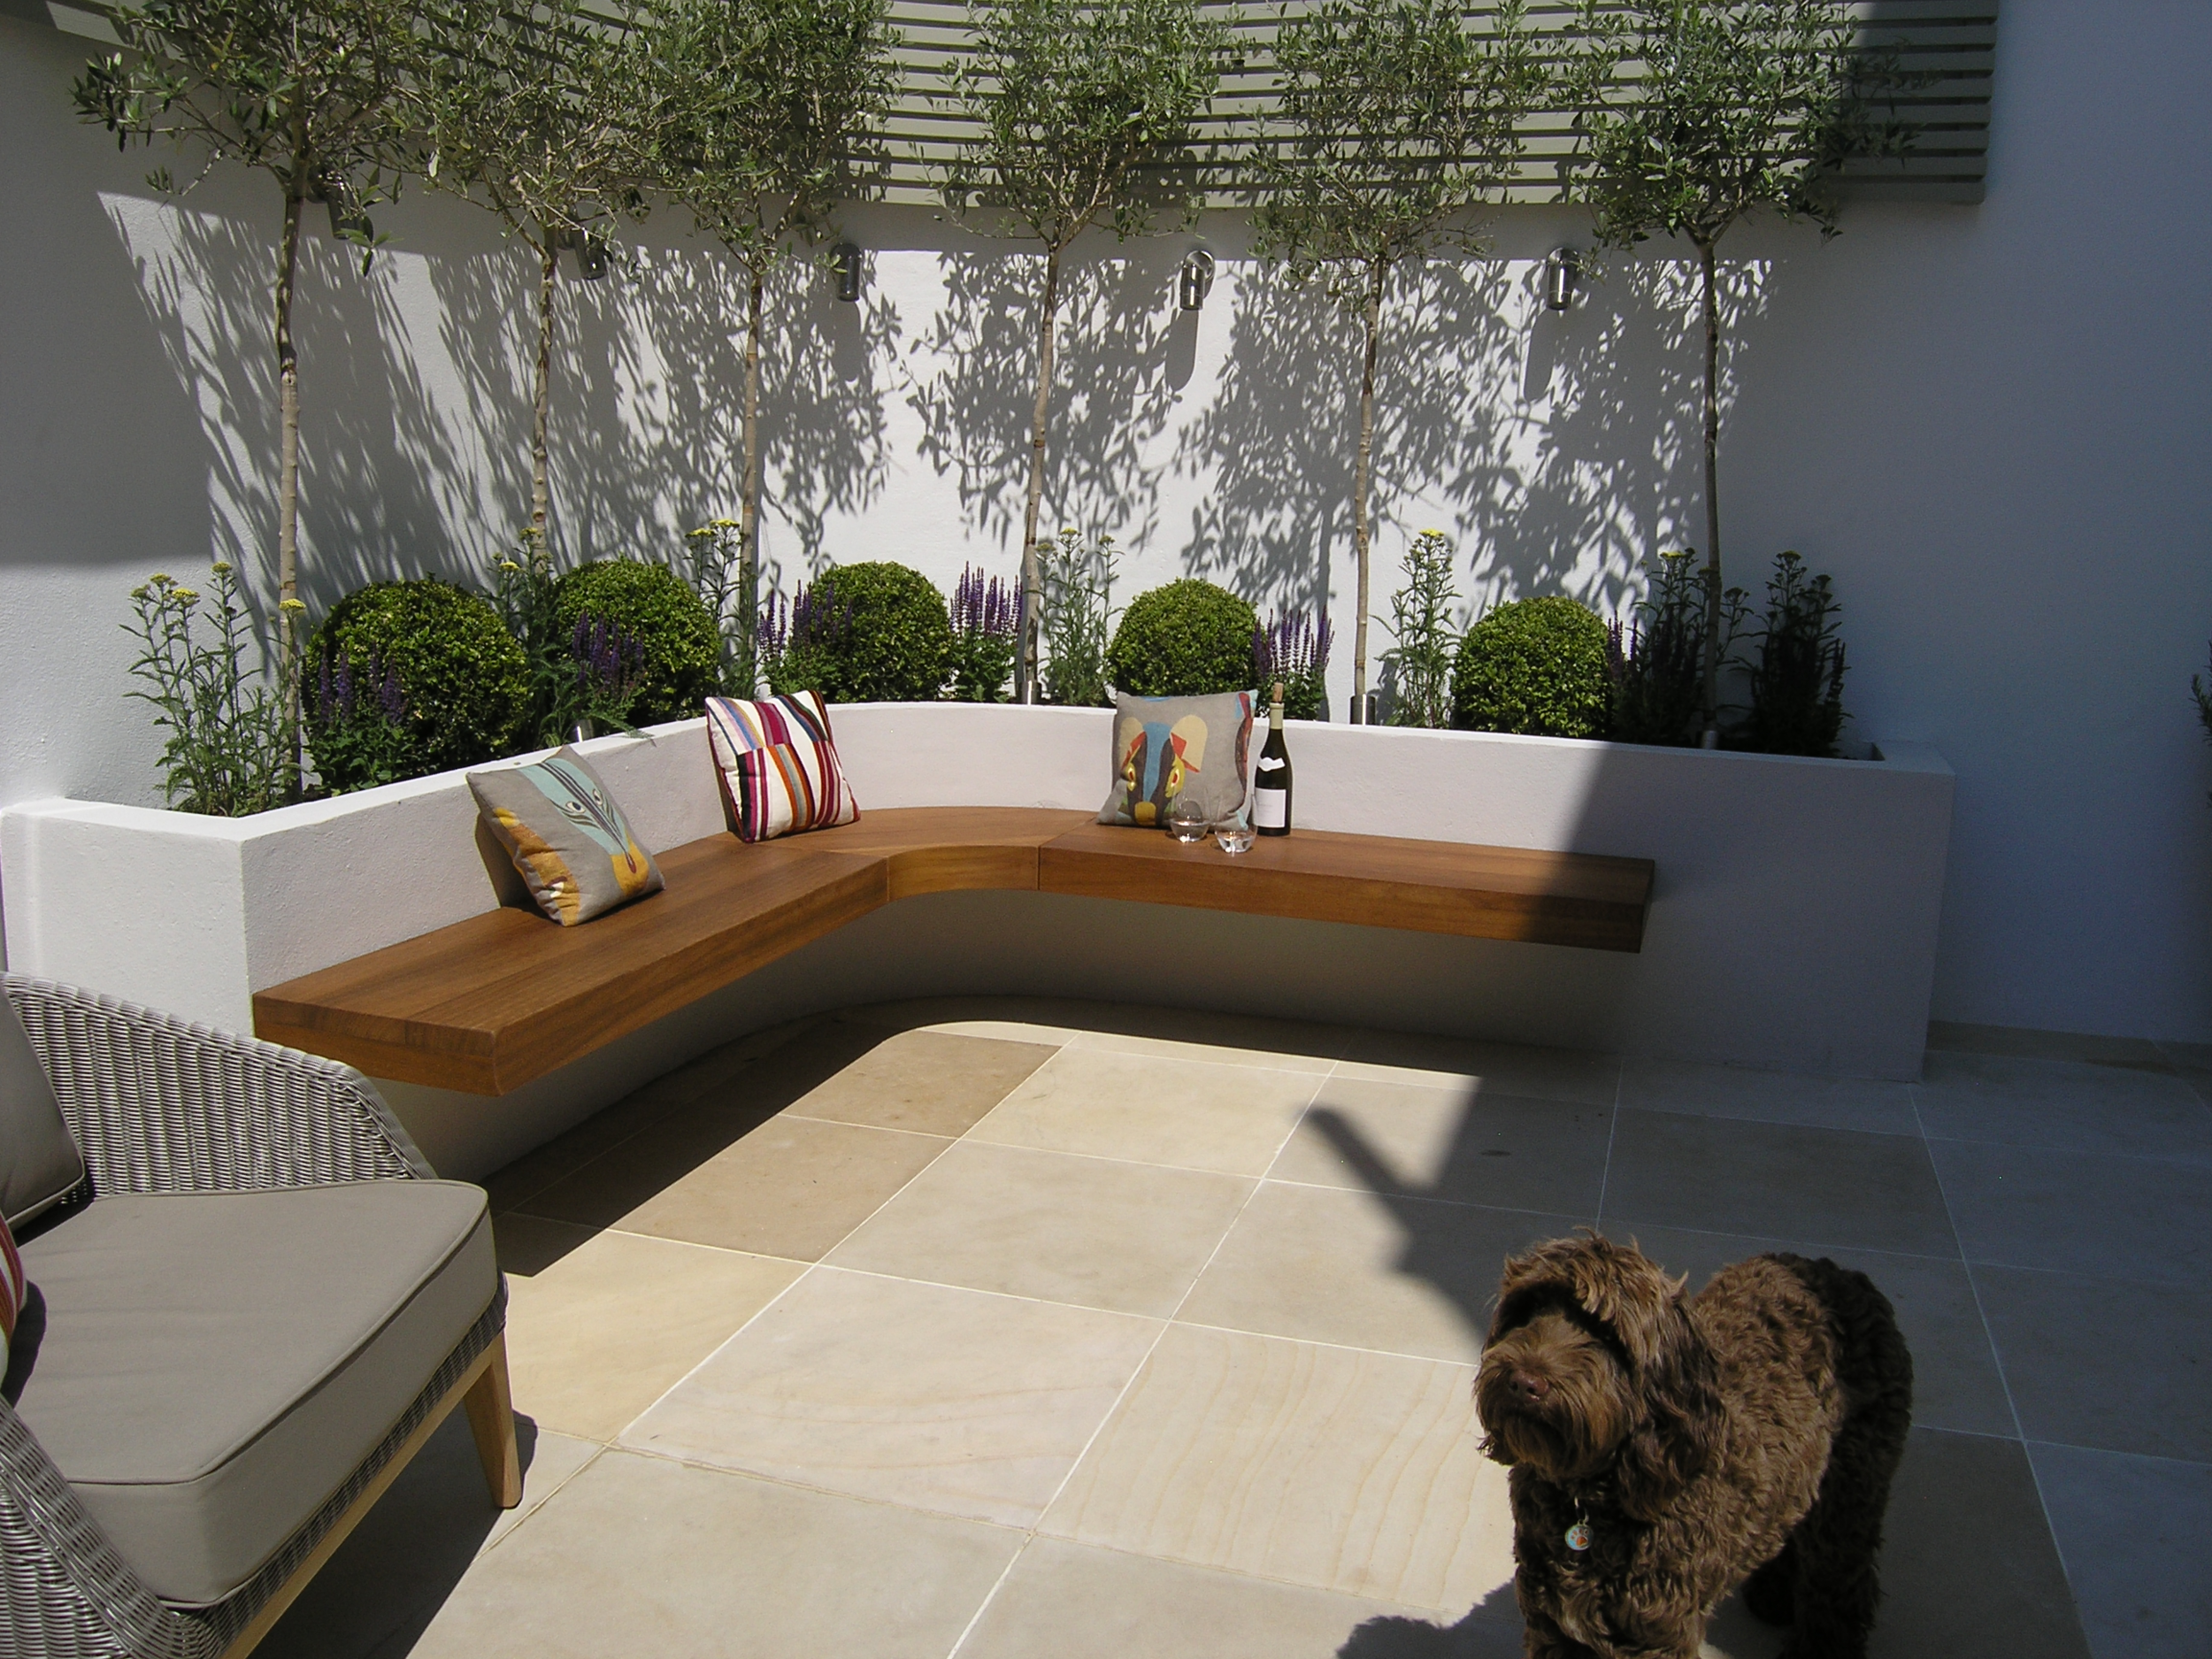 Courtyard garden ideas in London N8 with patio, benches and low maintenance planting